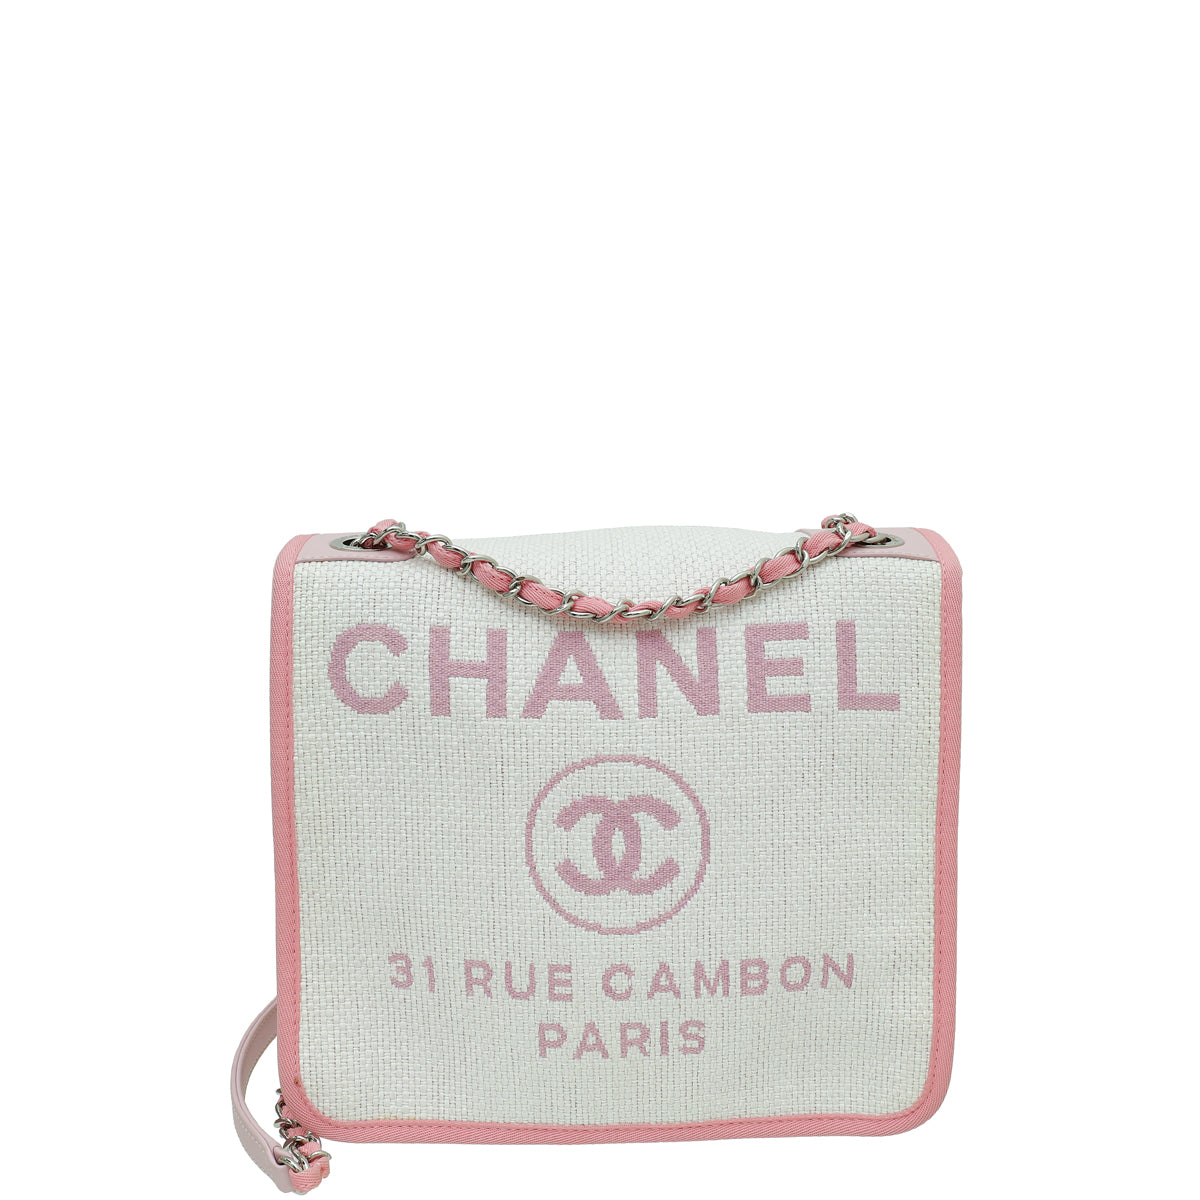 Chanel Bicolor Straw Deauville Messenger Small Bag